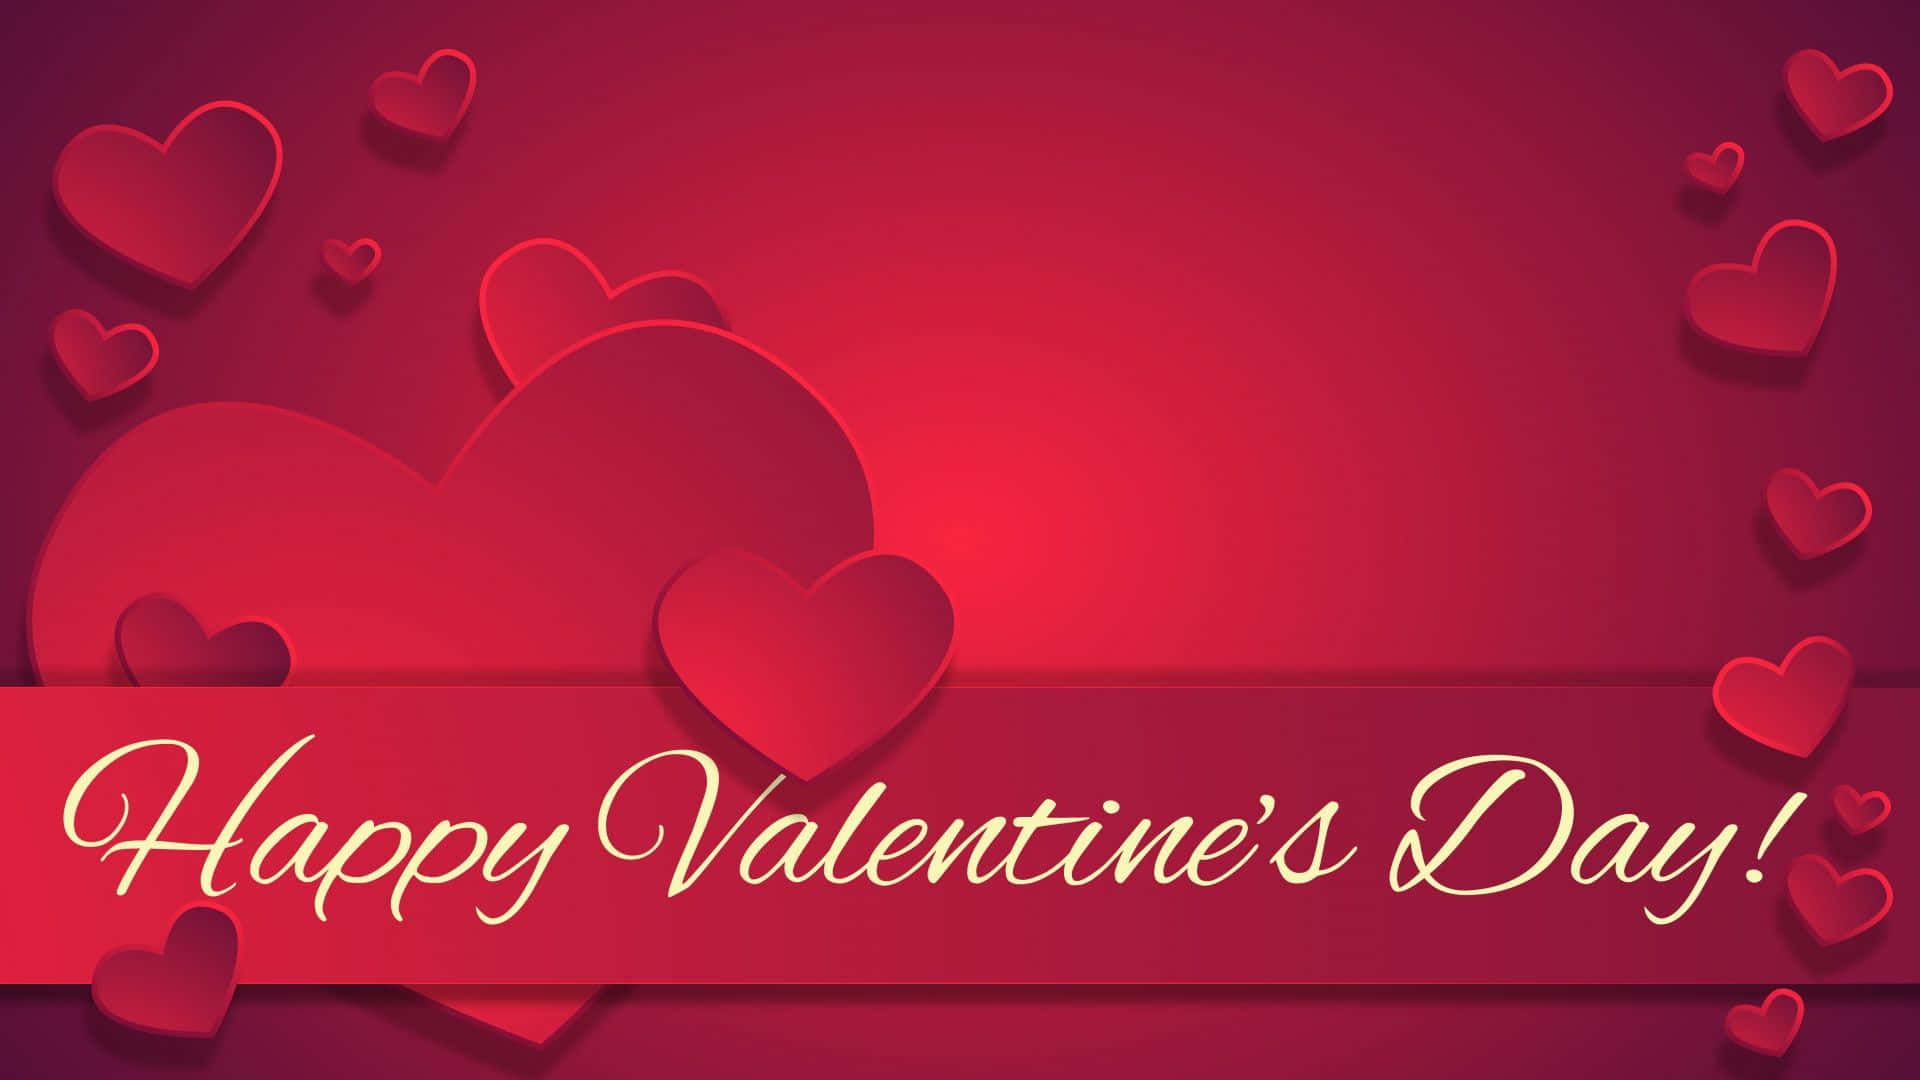 Celebrate love this year with a heartwarming Happy Valentine's Day Wallpaper